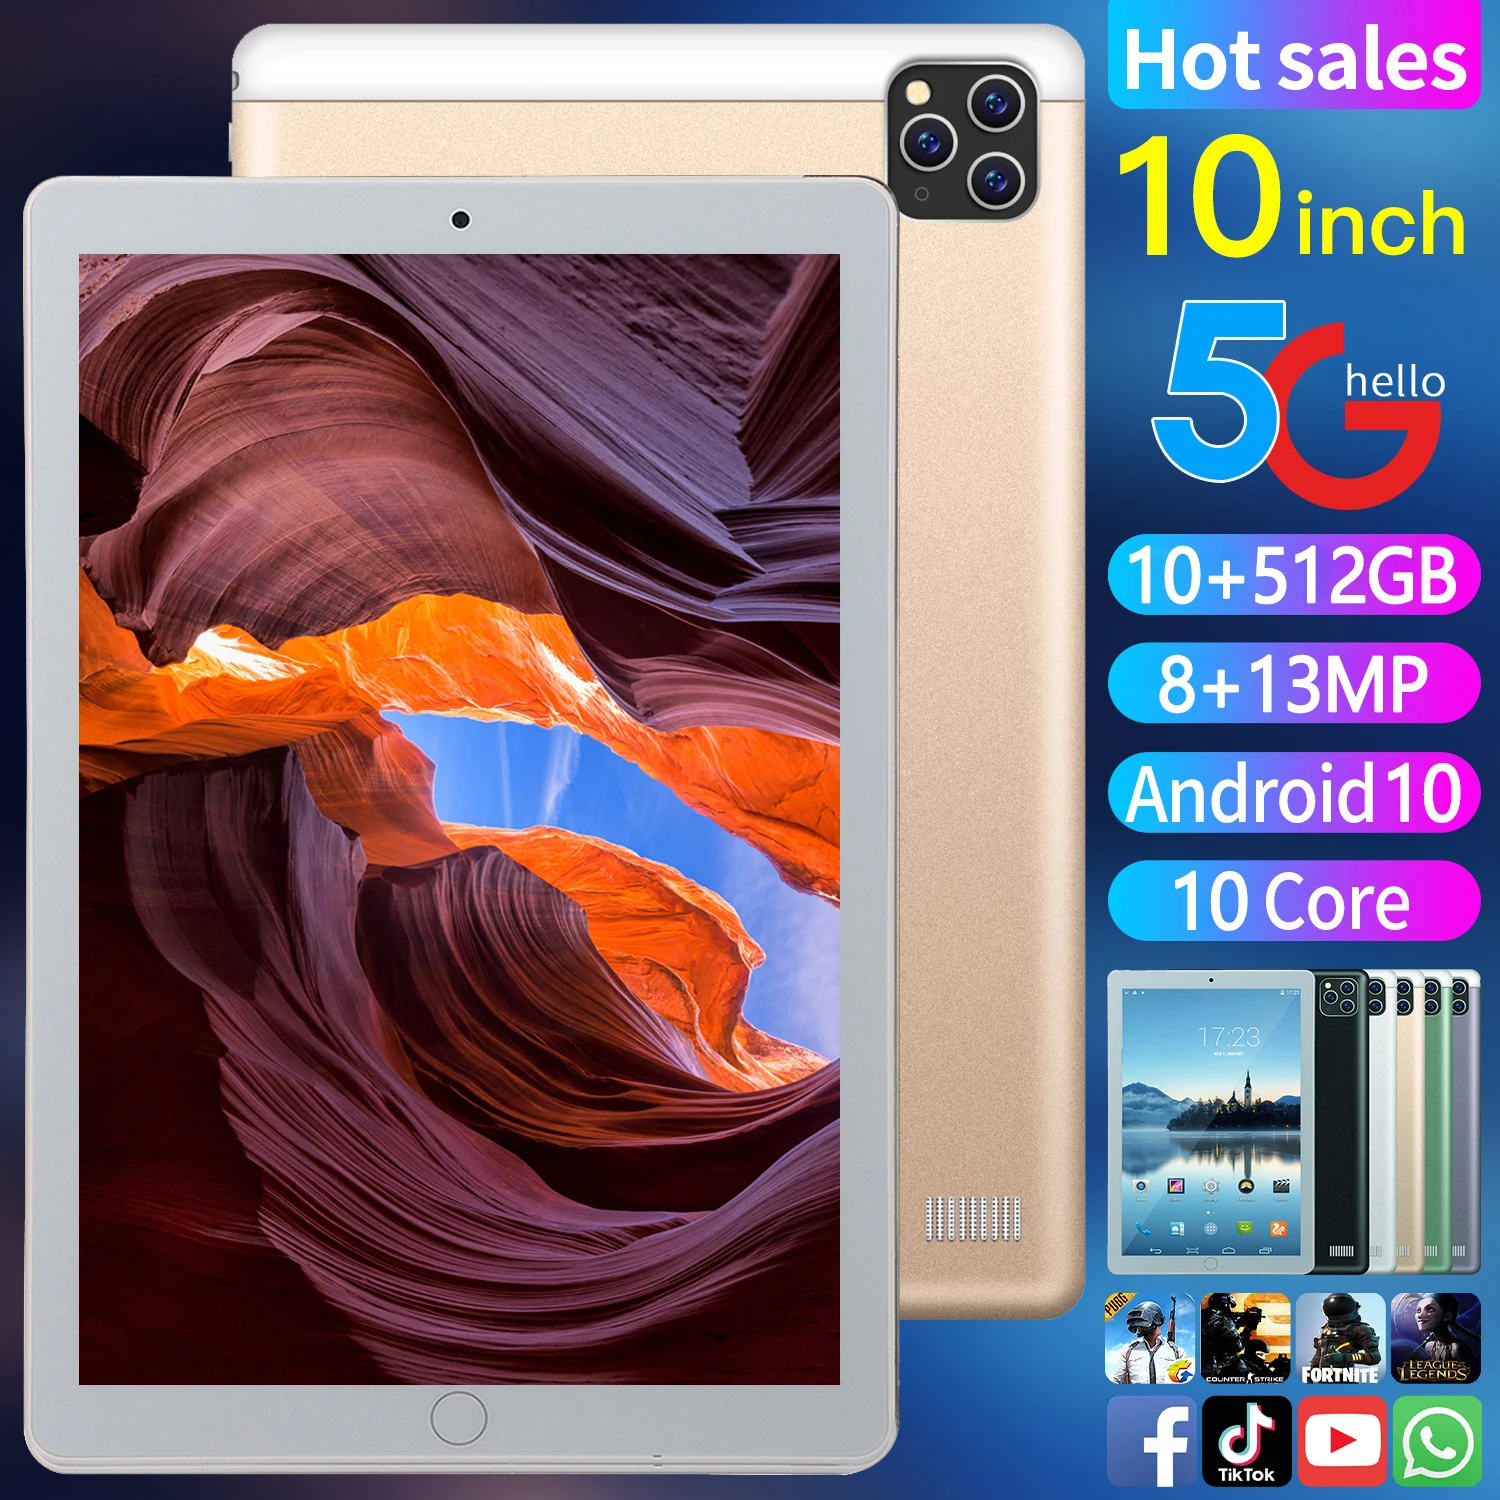 

Global Version S11 10-inch TabletPC 2560x1600 IPS 10GB RAM 512GB ROM 5G Network Dual SIM 10 Core Android Wifi Tablet PC